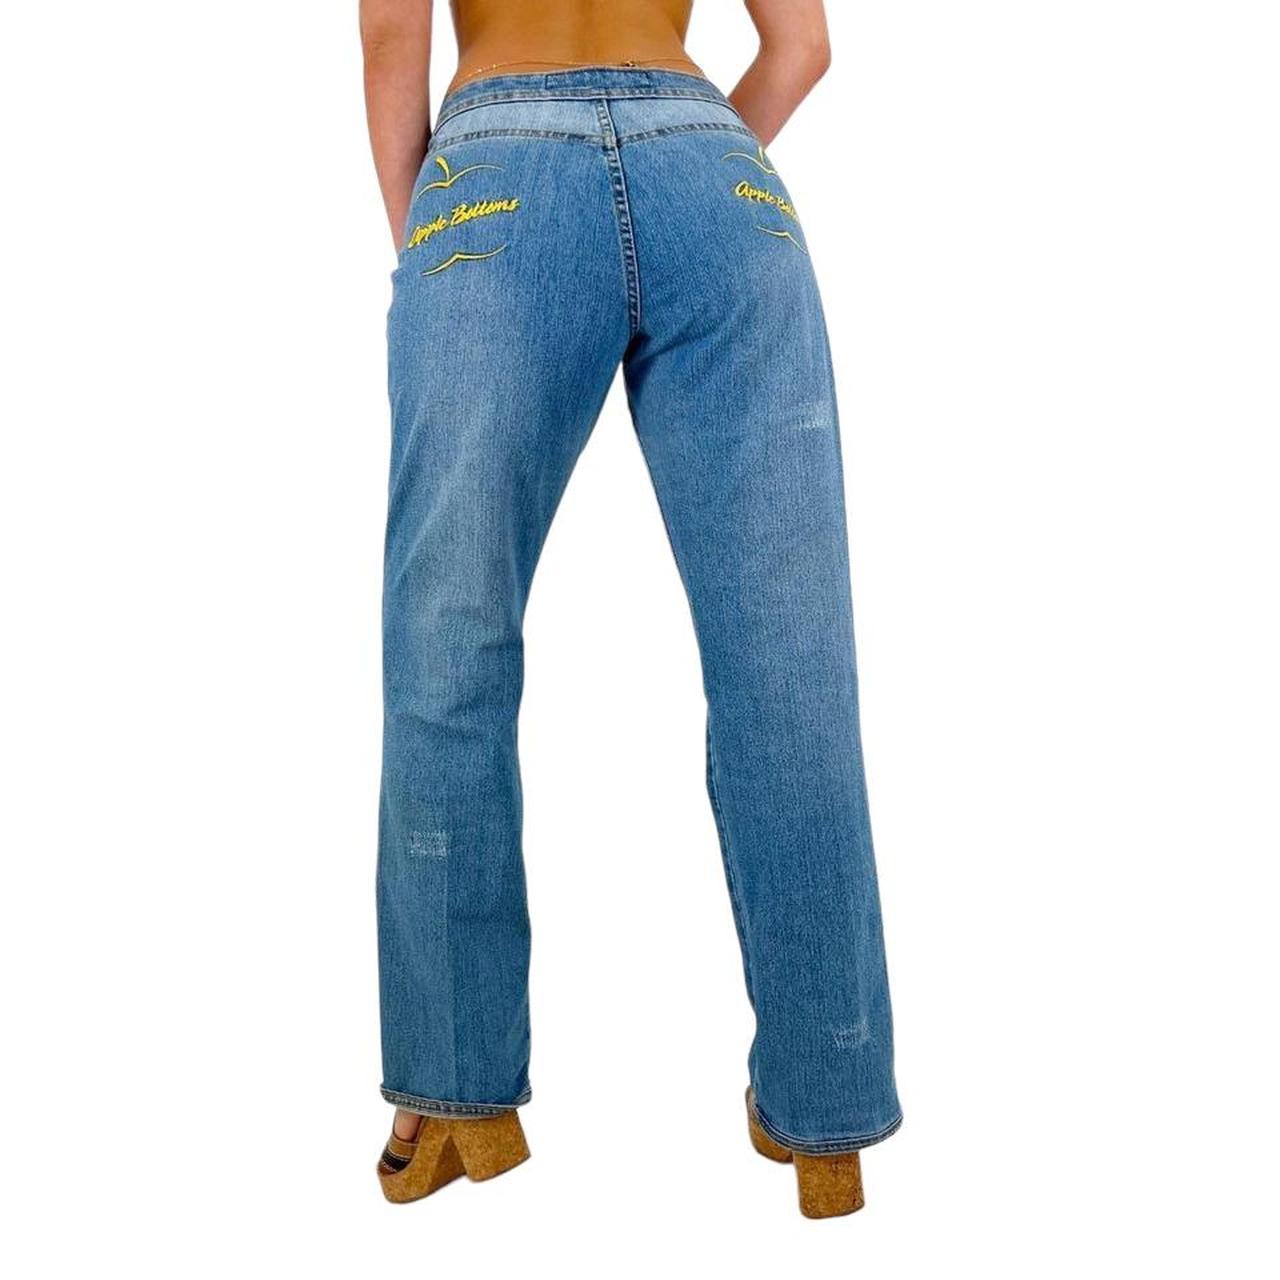 Y2k Vintage Apple Bottom Pocketless Light Wash Mid-Rise Jeans w/ Yellow Embroidery [L]